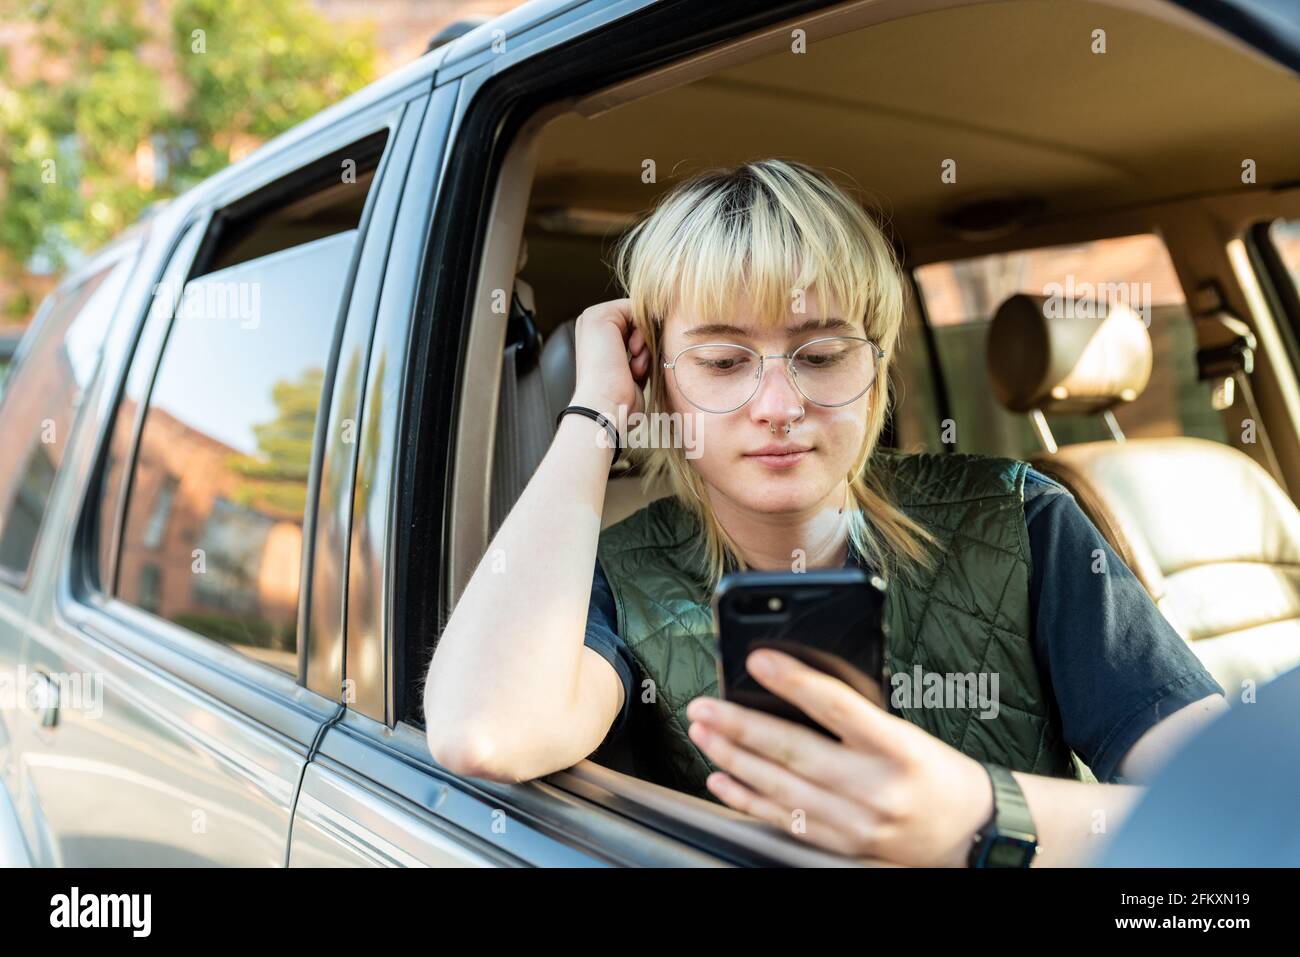 Teenager sitting in passenger seat of car looking at cell phone Stock Photo